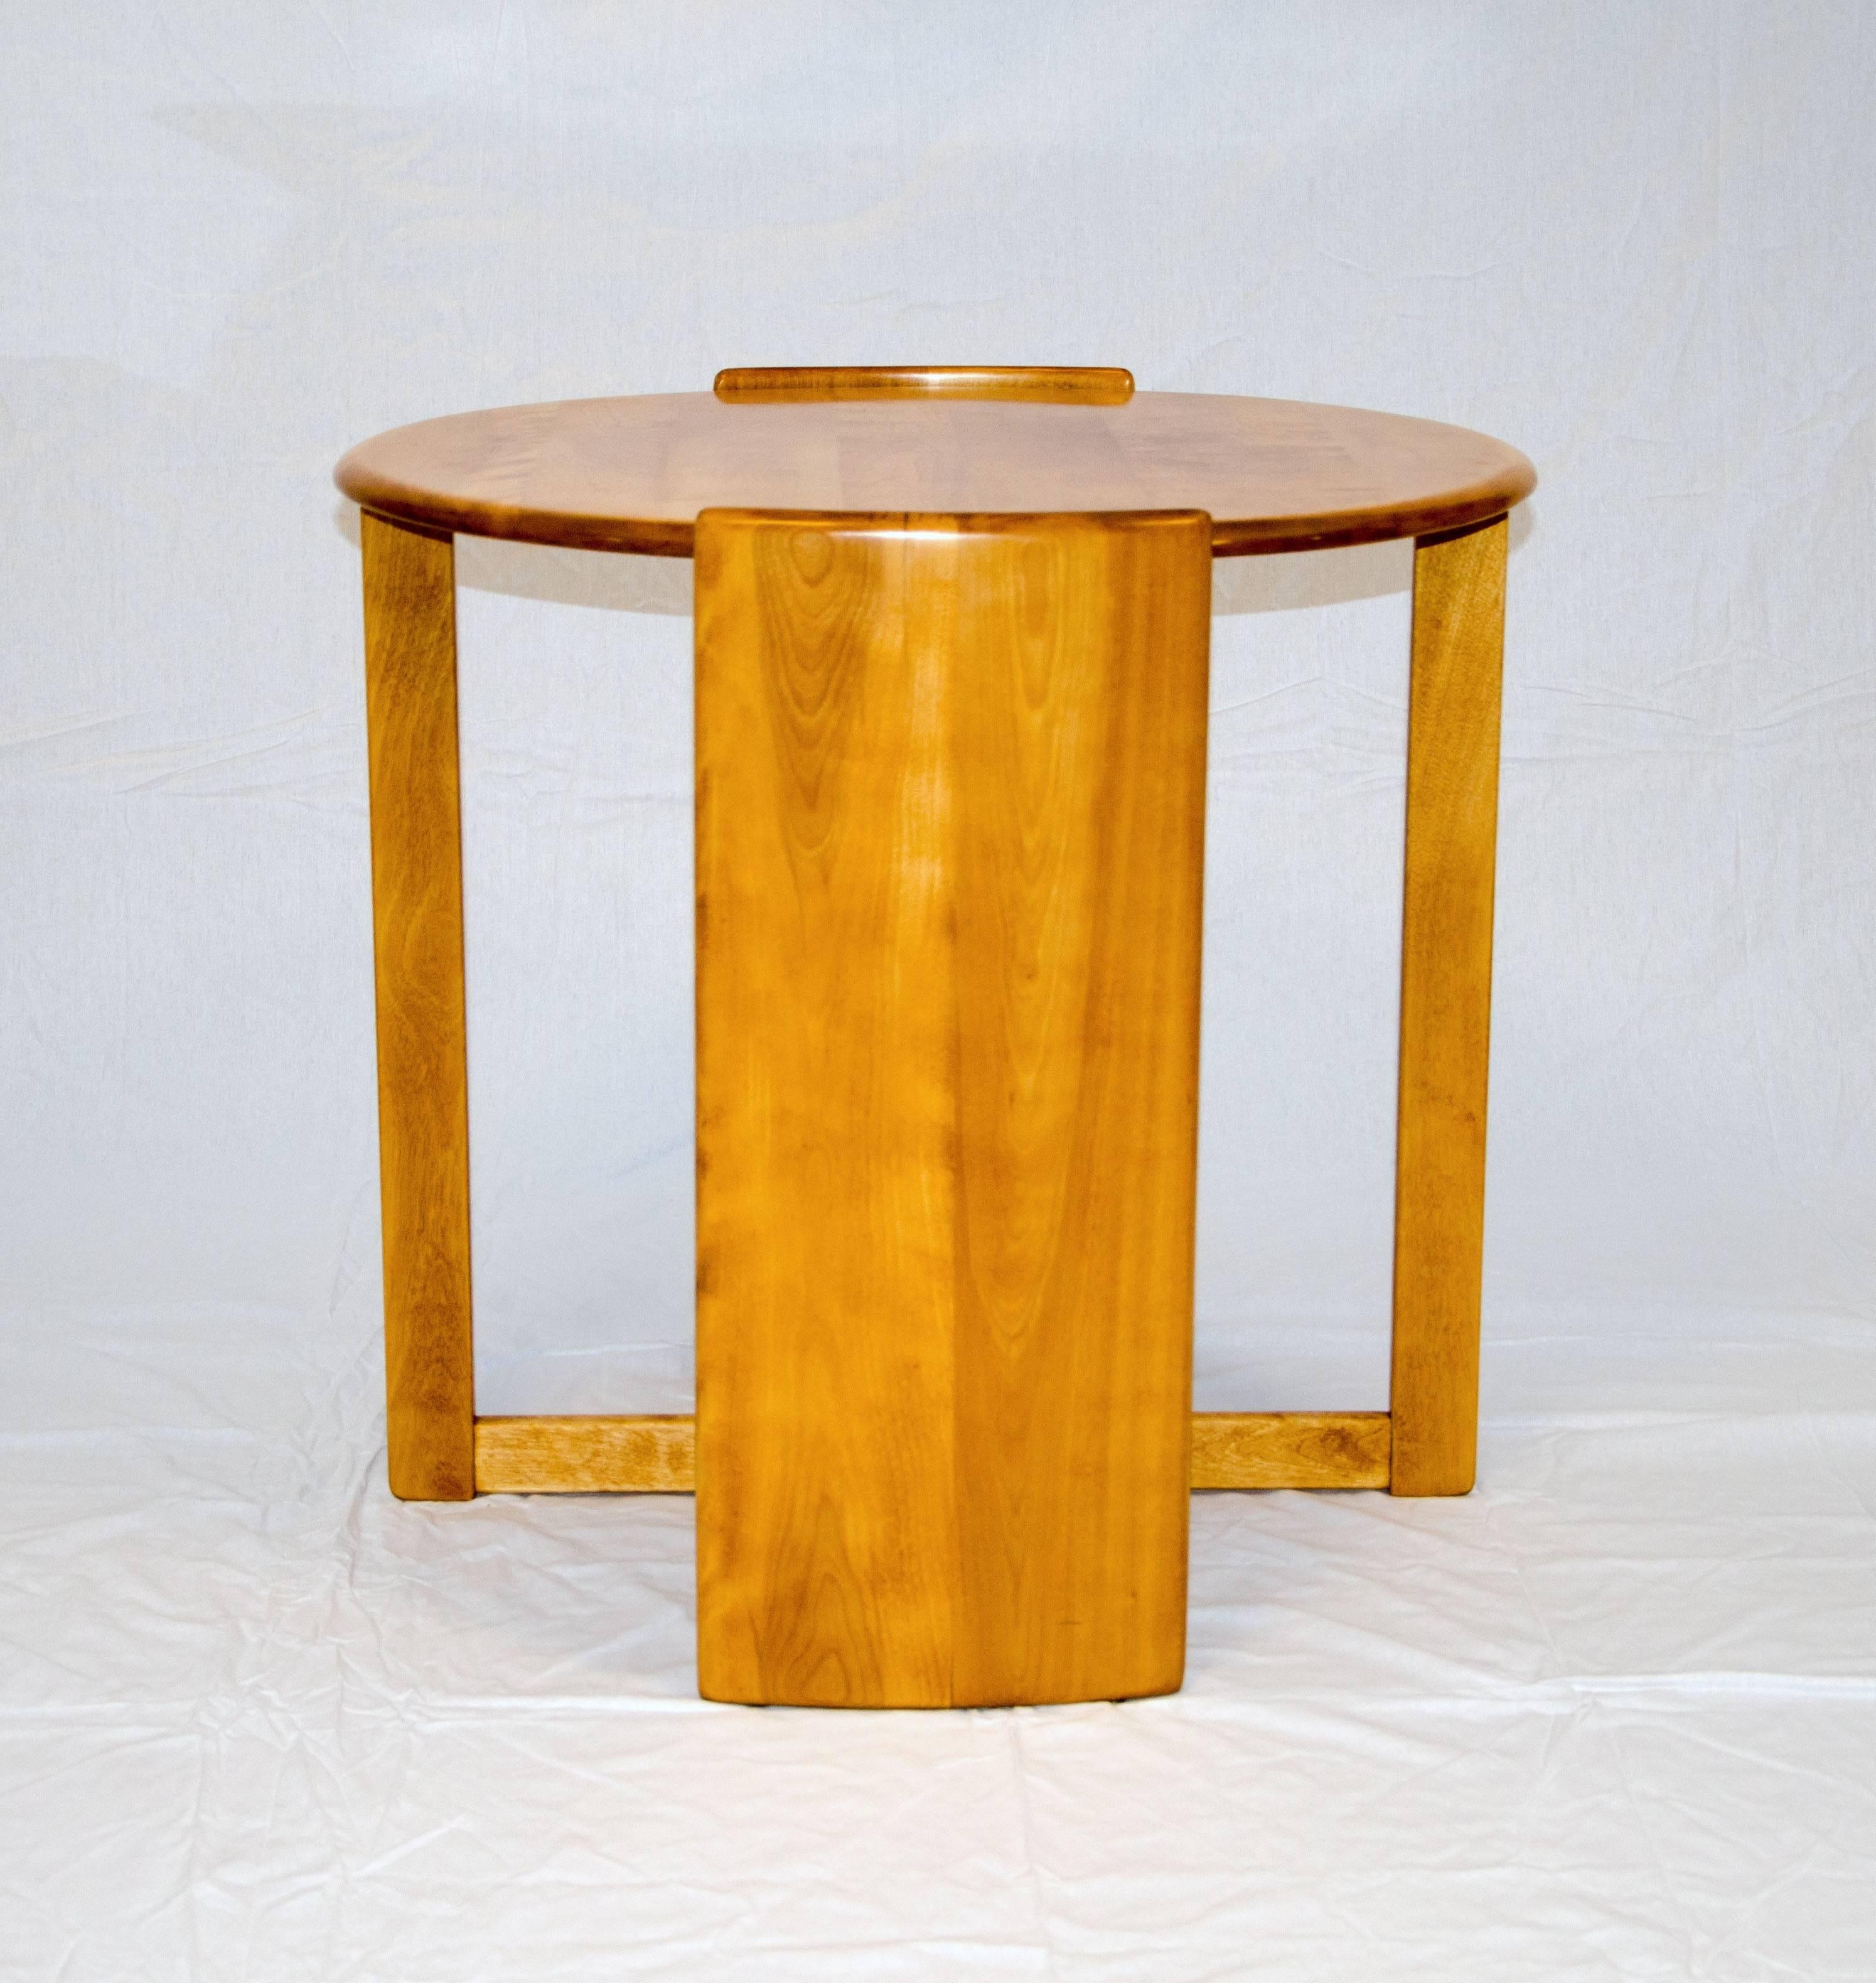 Very nice slightly off-round Heywood Wakefield streamline modern table that can be used in a corner or as a centre table. Manufactured only for two years 1936-1938. Model C 2922 G on pages 68 & 94 of 